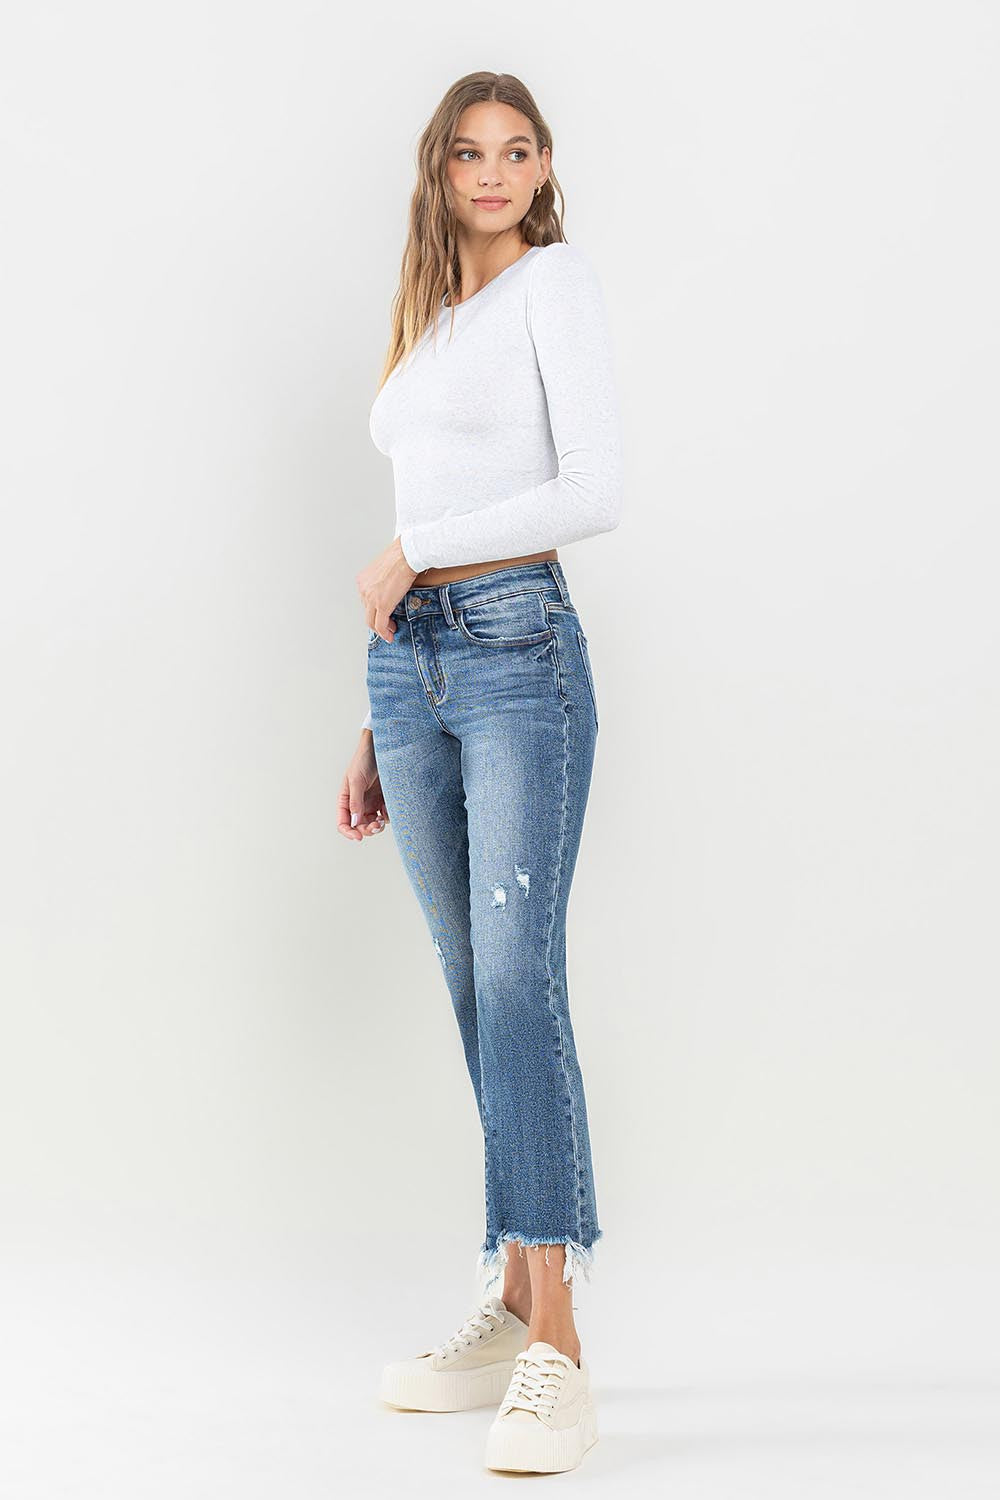 Turn heads with Lovervet Jeans featuring a trendy mid-rise fit and stylish frayed hems. Perfect for day-to-night looks.